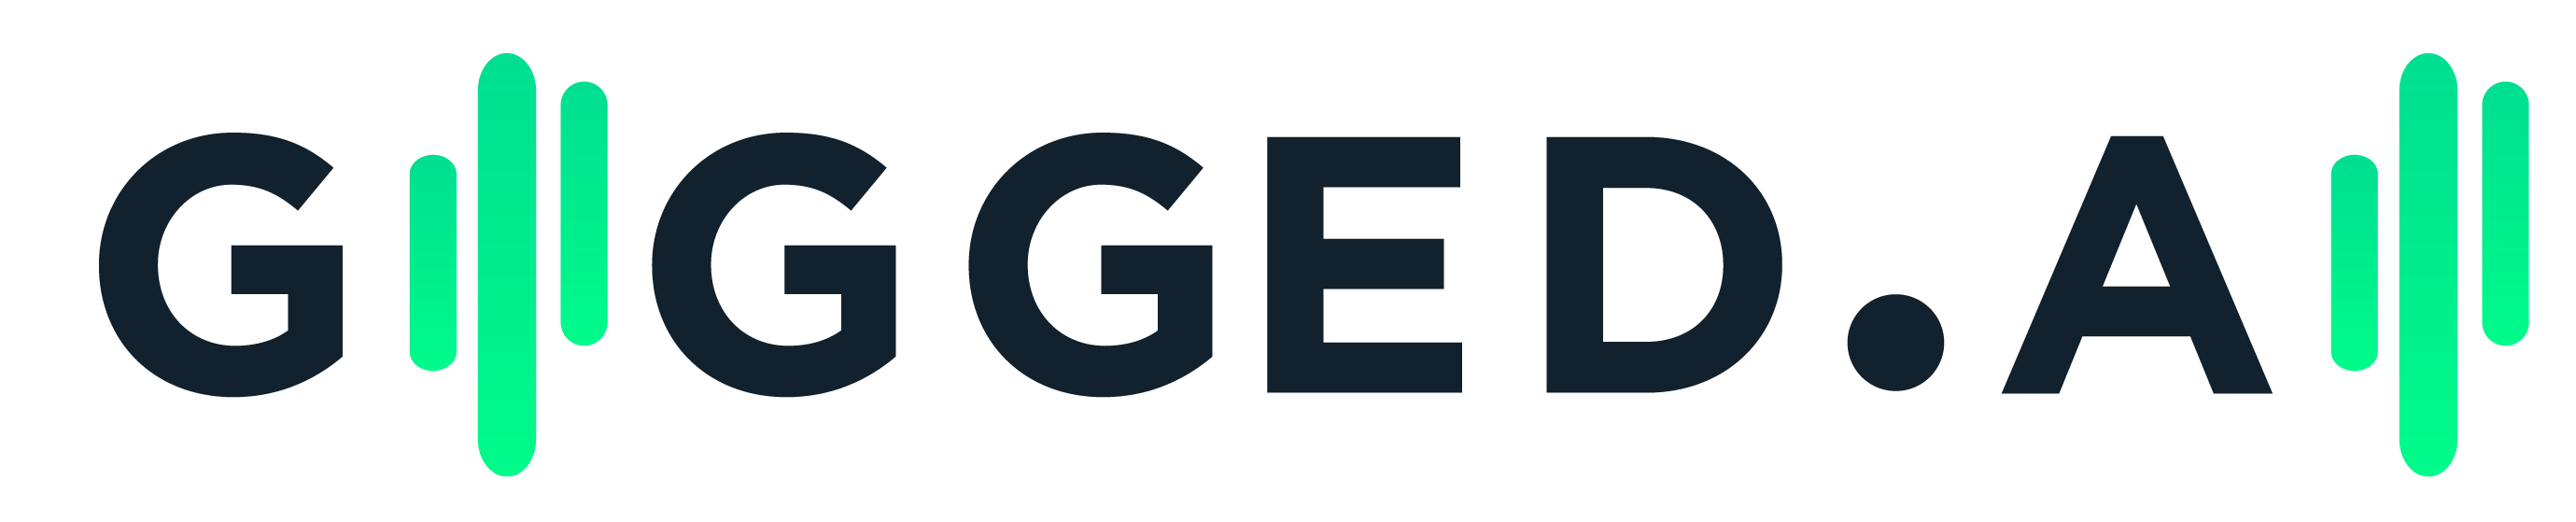 GIGGED.AI secures funding from Innovate UK for AI development